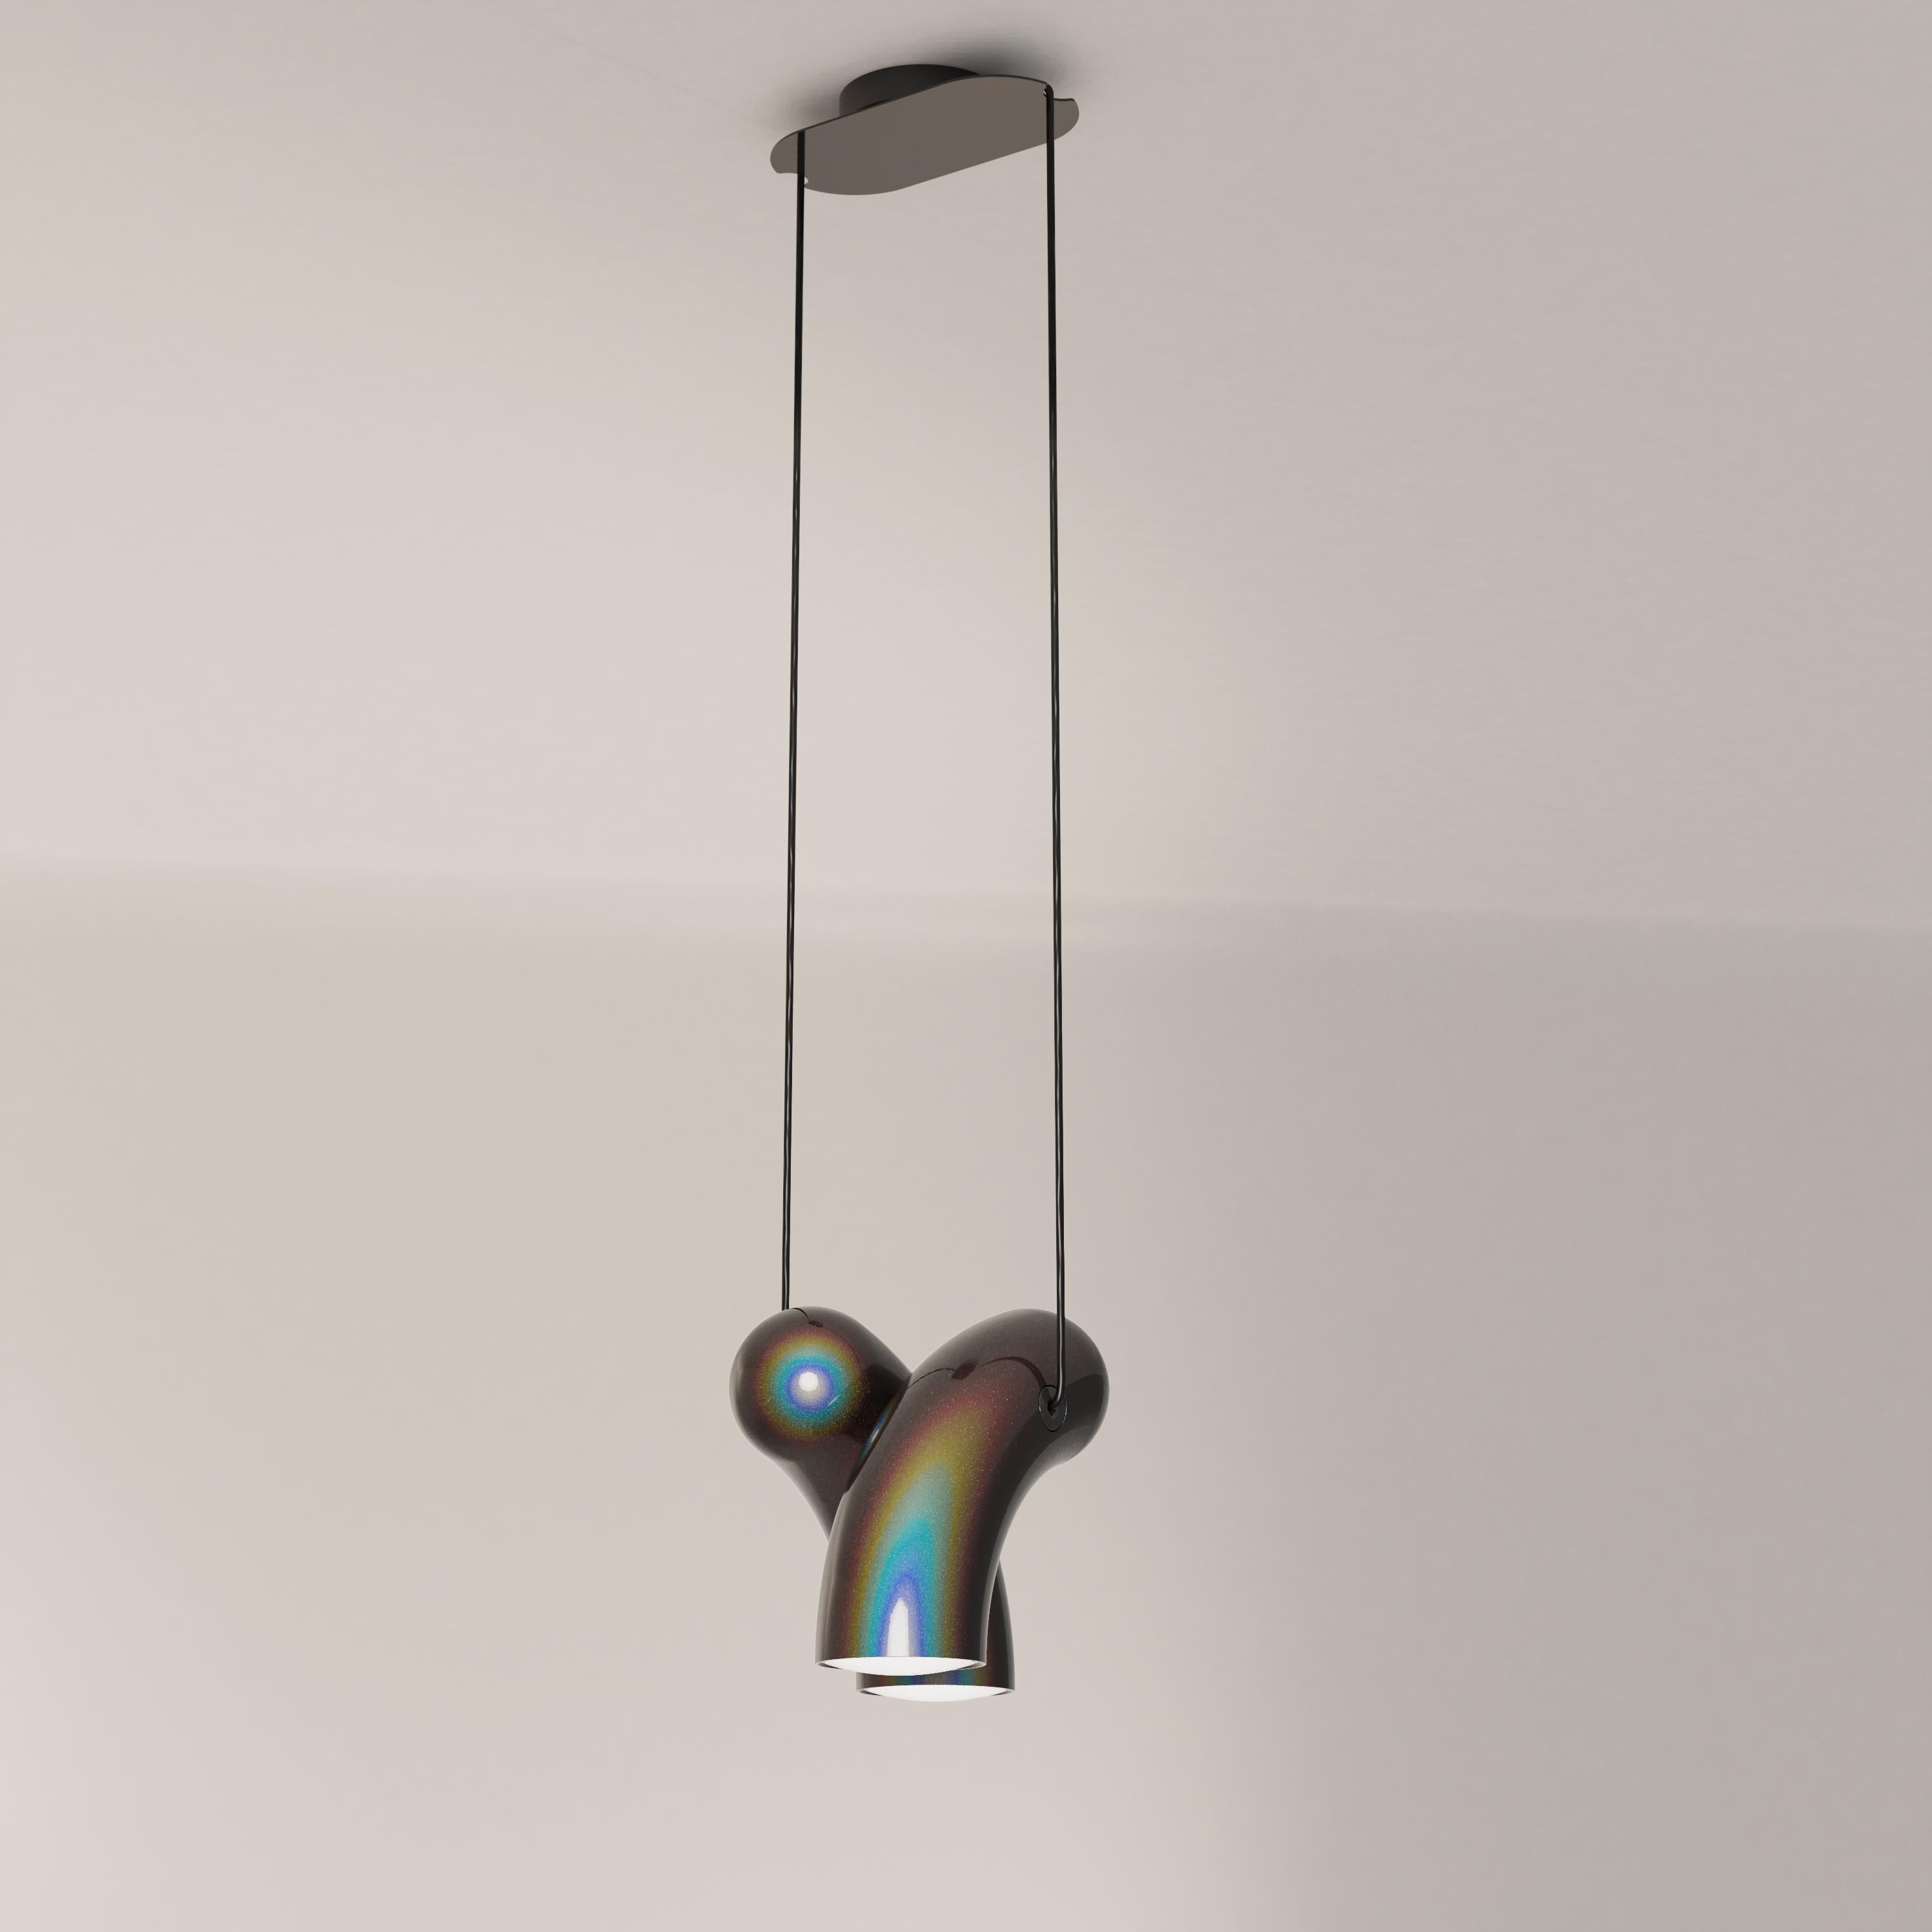 Chromatic black Hyphen pendant lamp by Studio d'Armes
Dimensions: D 29 x W 22 x H 24 cm
Materials: Chromatic black cast steel.
Available in steel sandy black, steel chromatic black, natural porcelain and steel custom.

Derived from the ancient